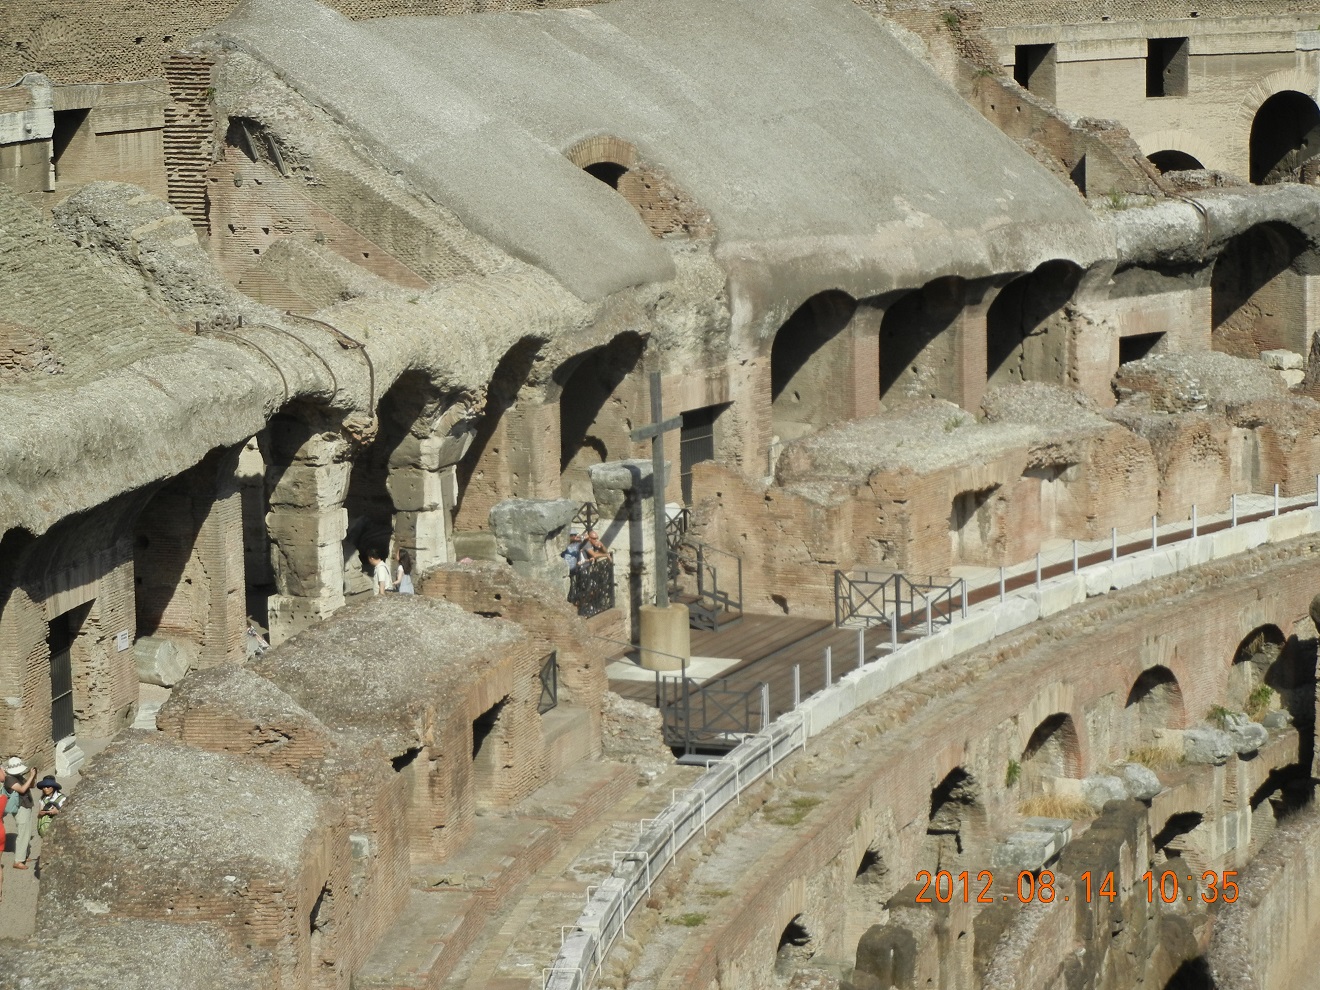 Colosseo - No place for seats